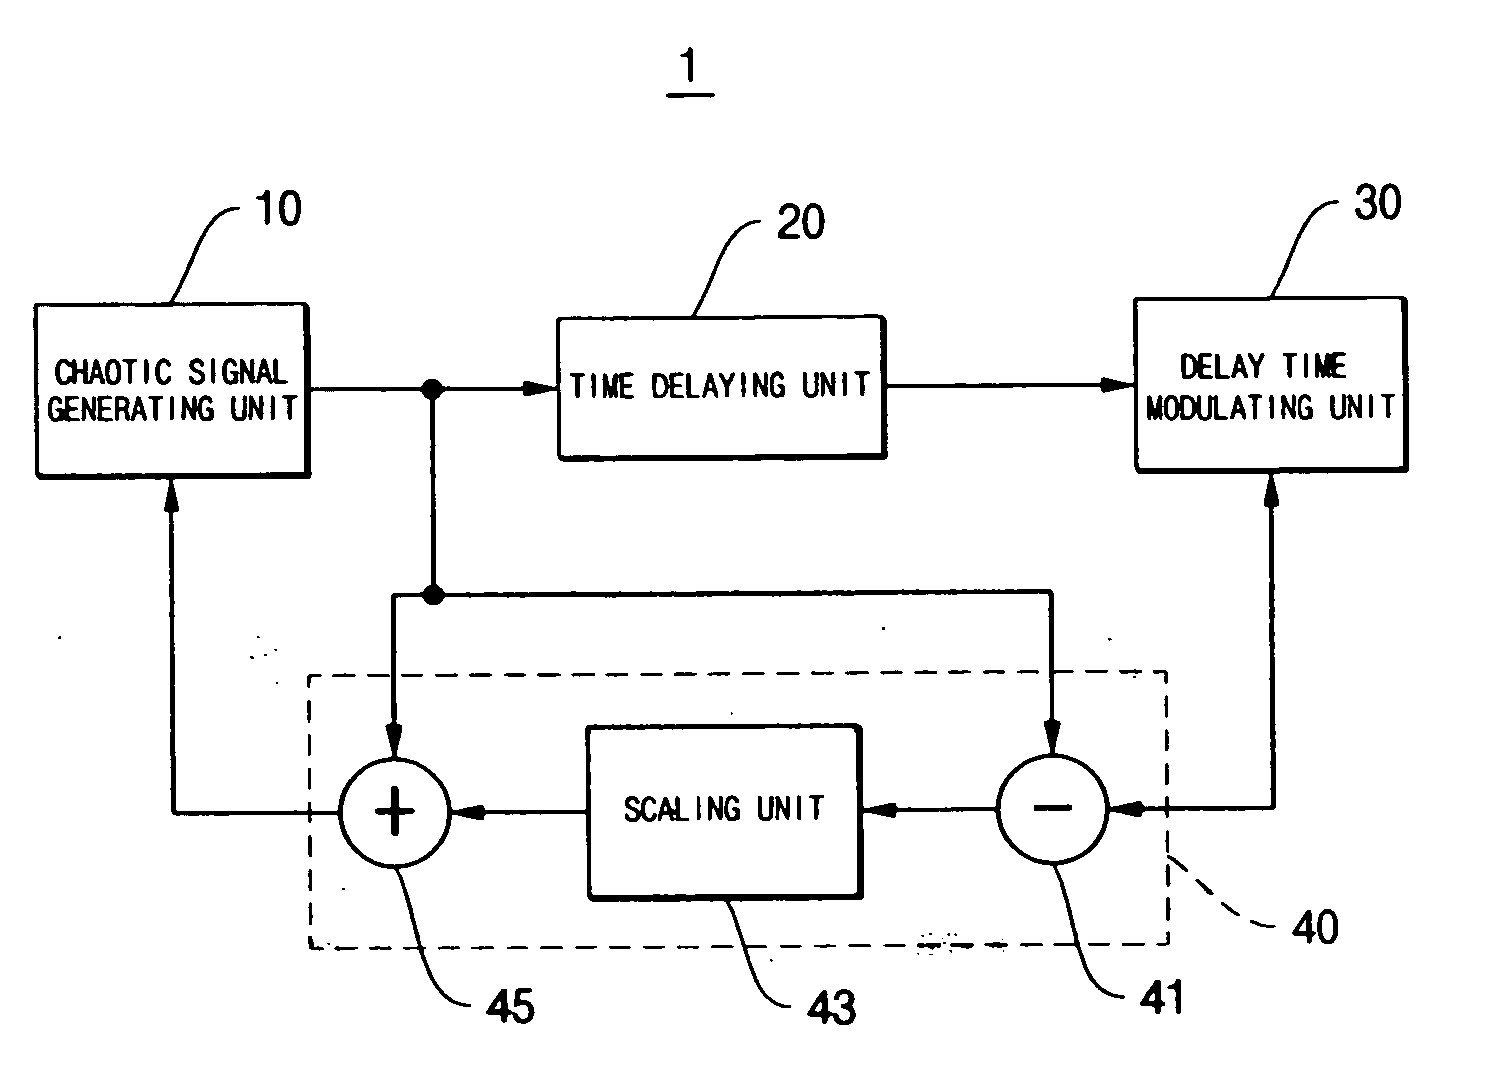 Encryption and communication apparatus and method using modulated delay time feedback chaotic system